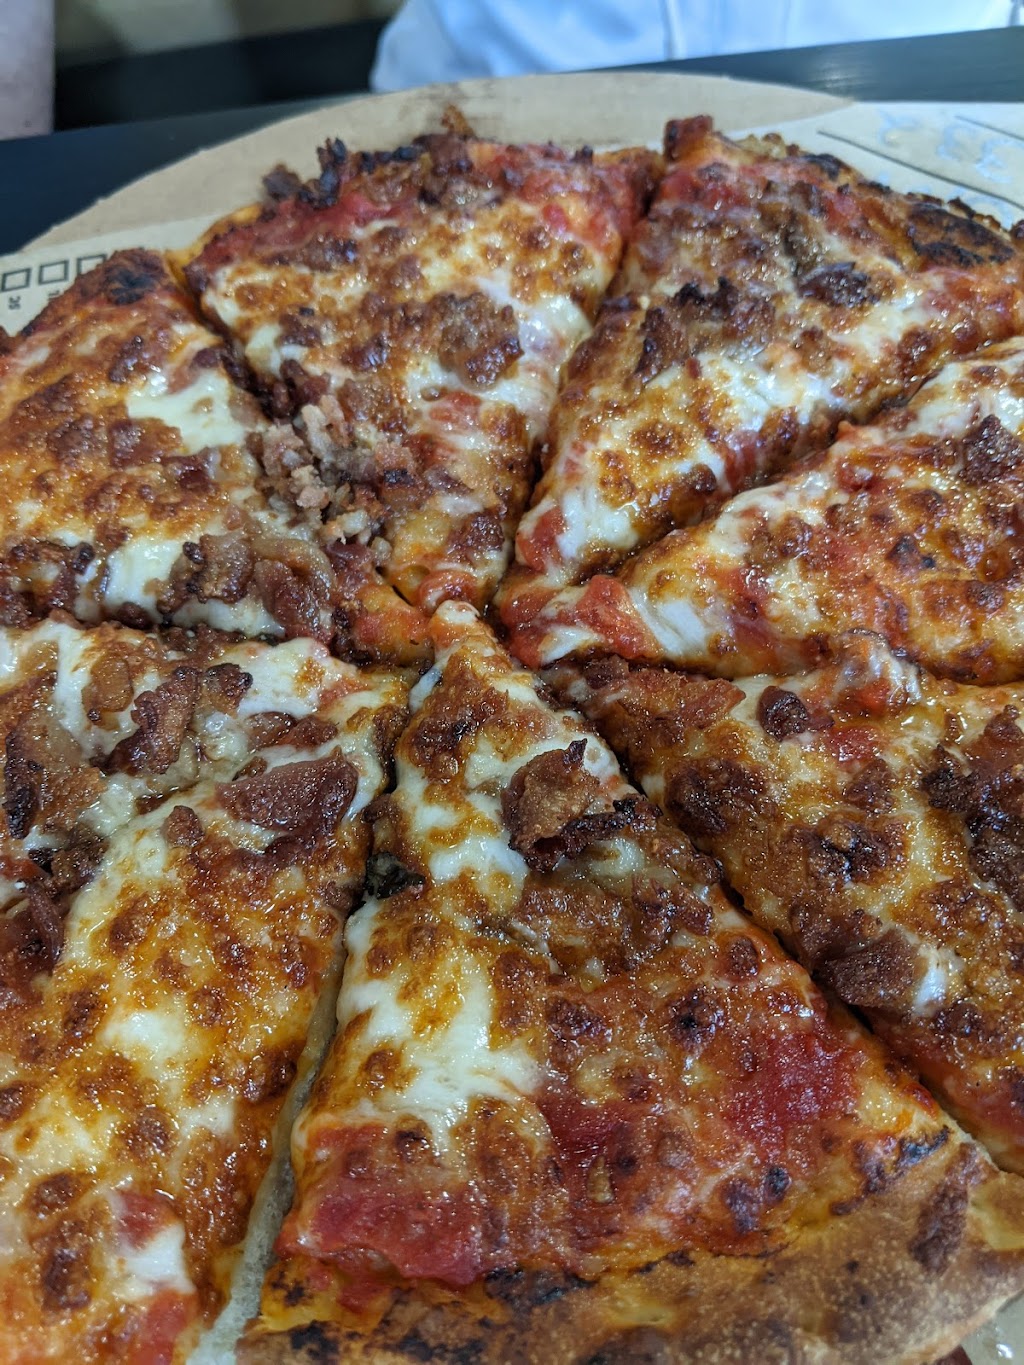 Rapid Fired Pizza | 200 Chamber Dr Suite 150, Milford, OH 45150 | Phone: (513) 340-4108